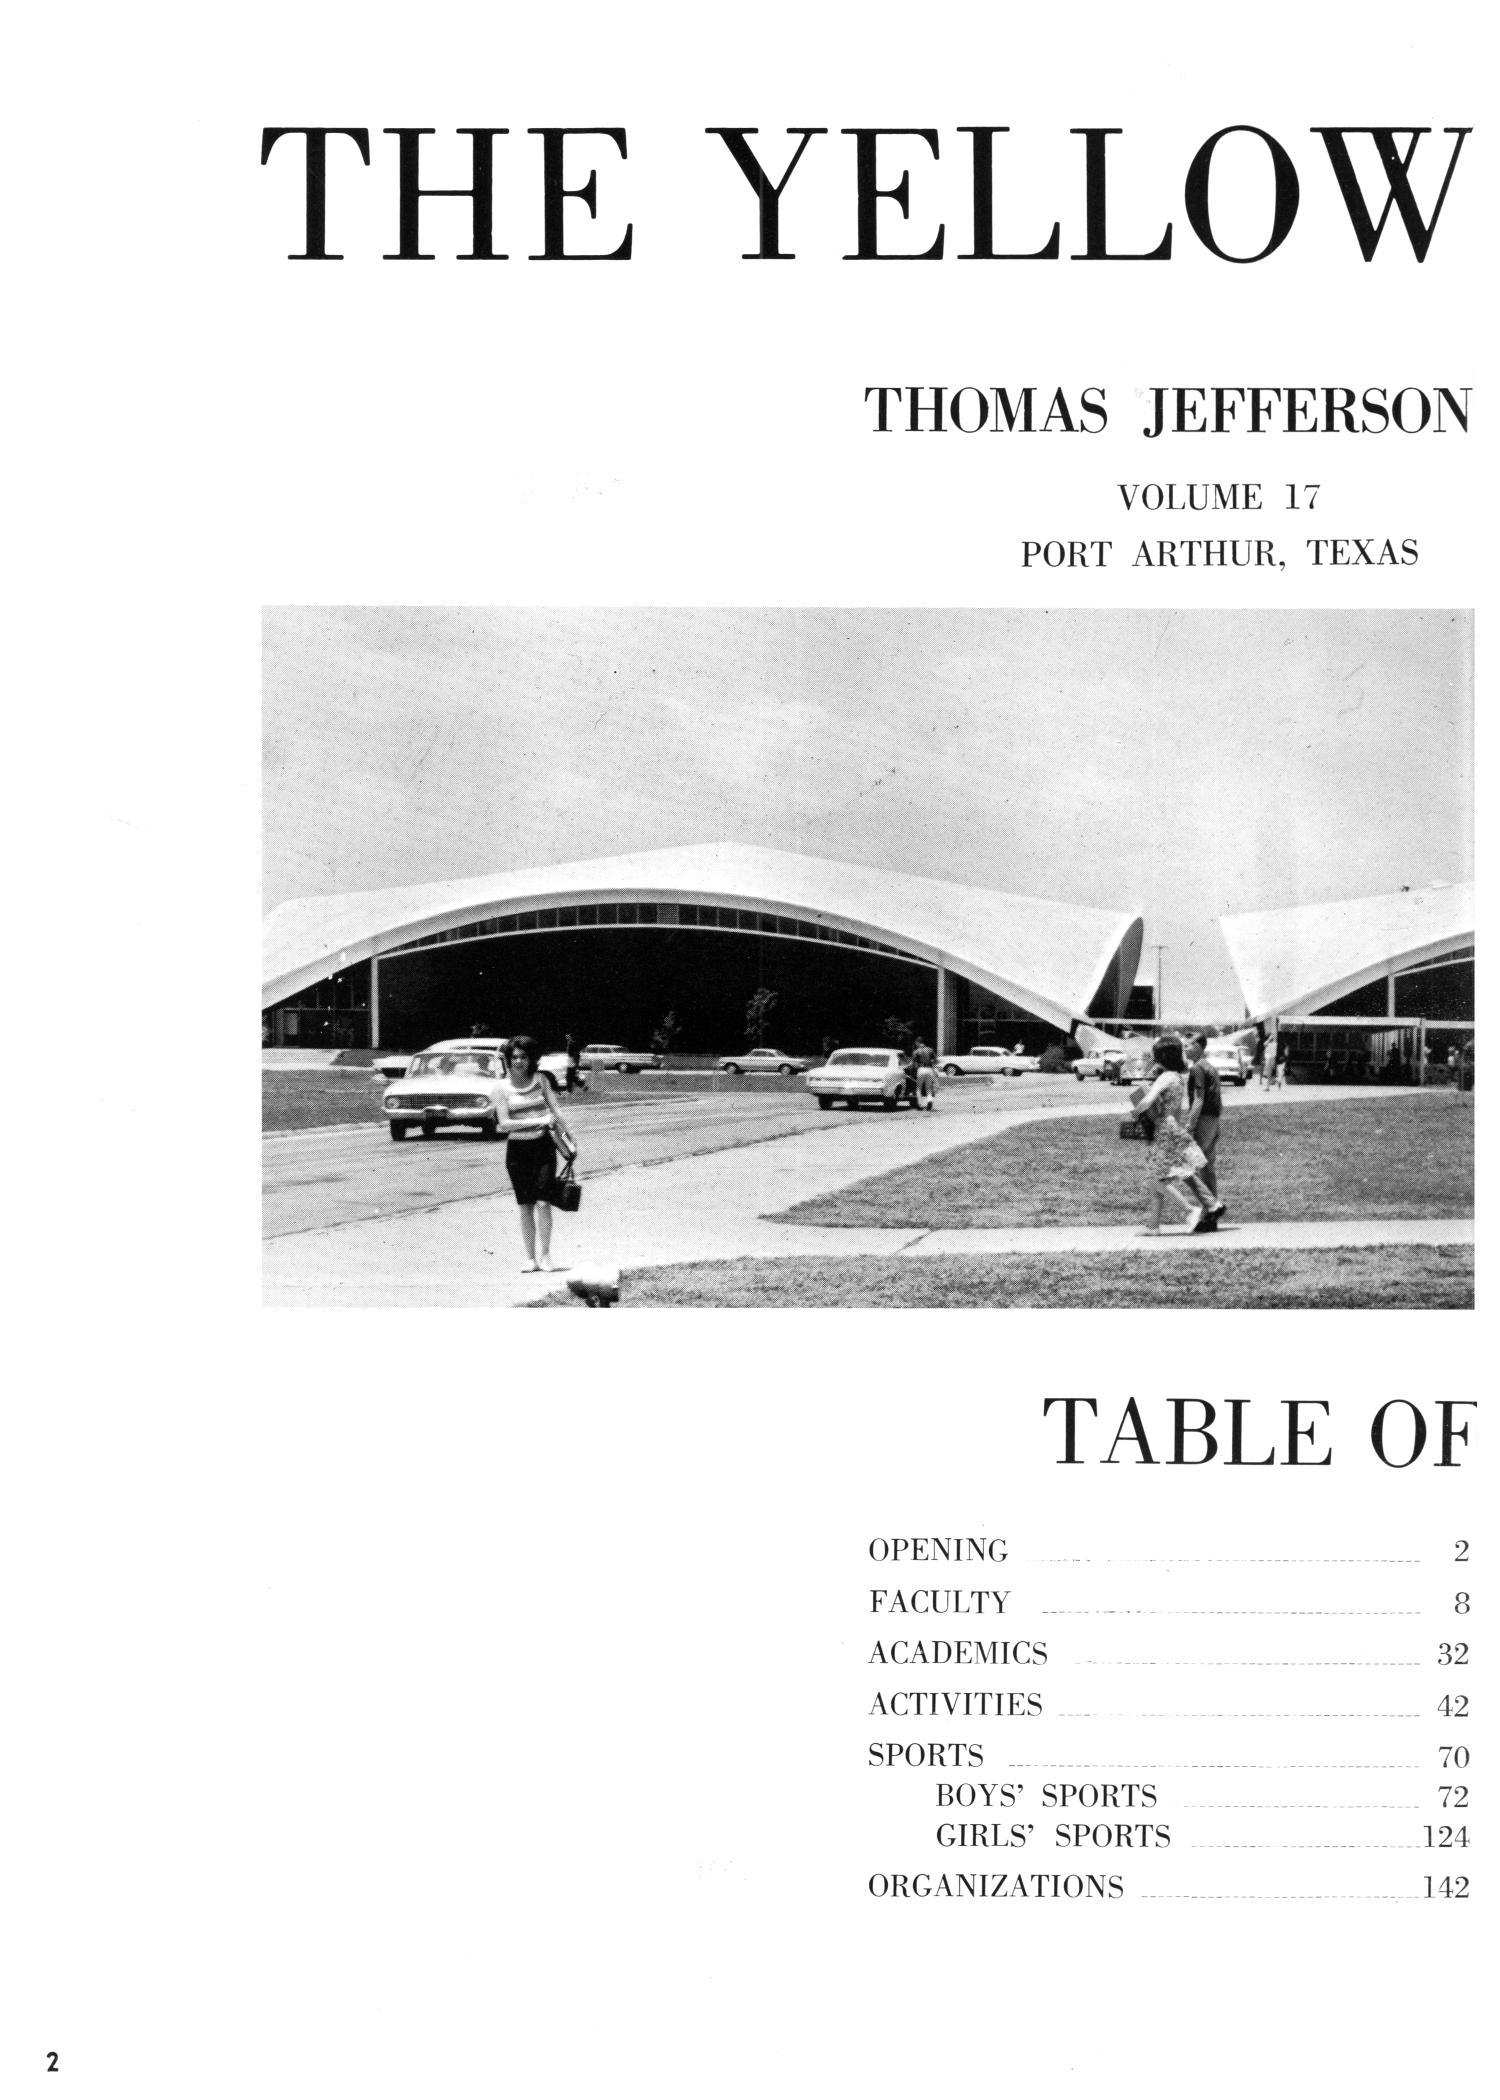 The Yellow Jacket, Yearbook of Thomas Jefferson High School, 1964
                                                
                                                    2
                                                